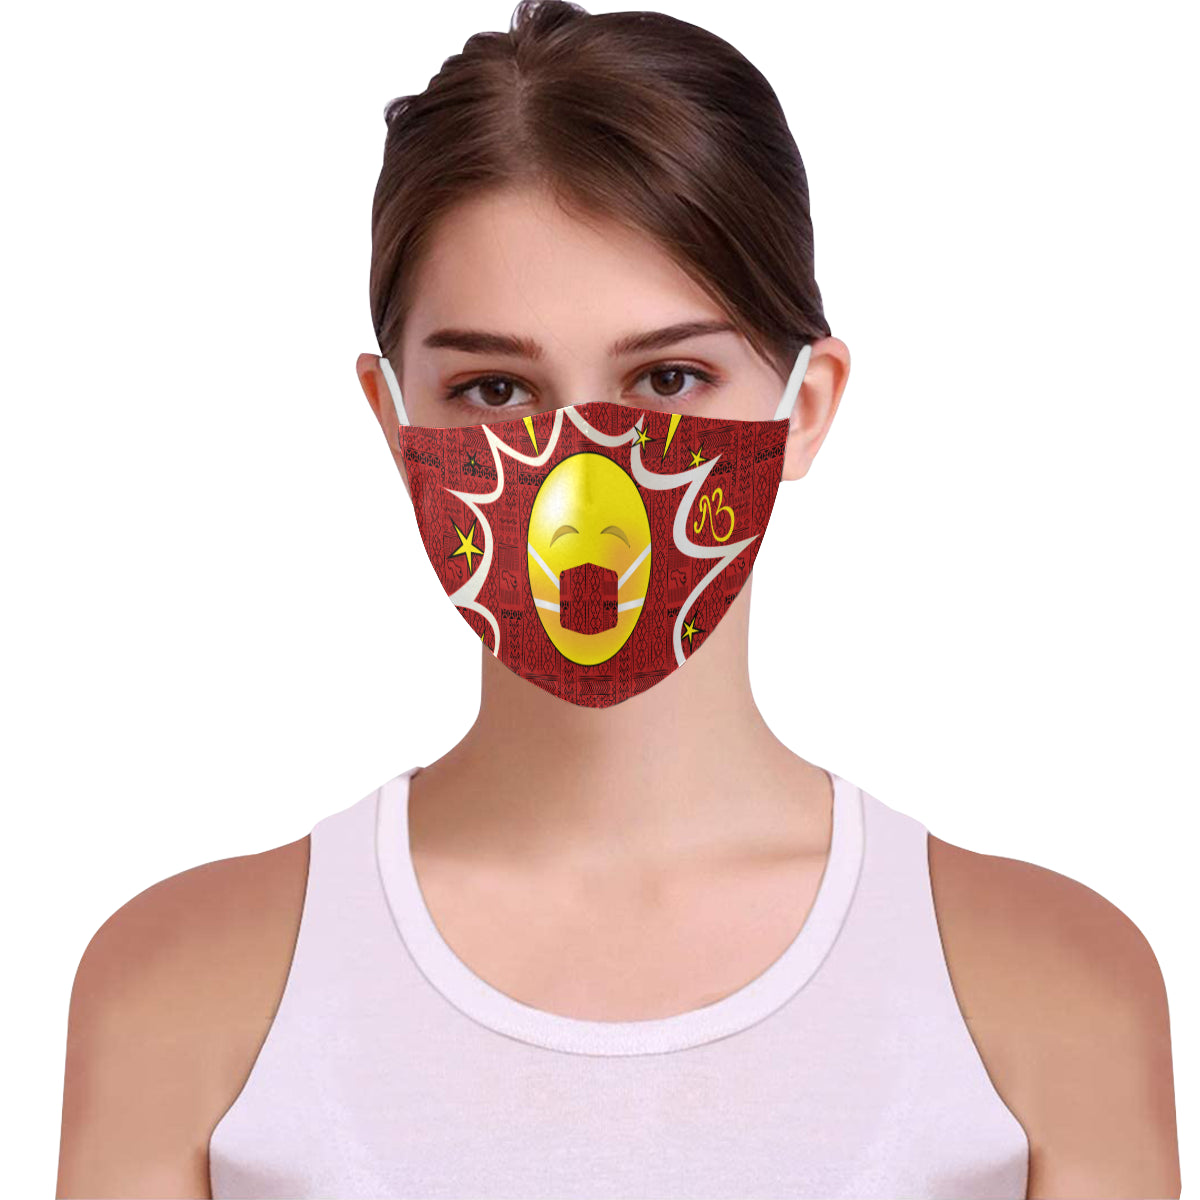 Mask on Tribal Print Comic Emoji Cotton Fabric Face Mask with Filter Slot and Adjustable Strap - Non-medical use (2 Filters Included)